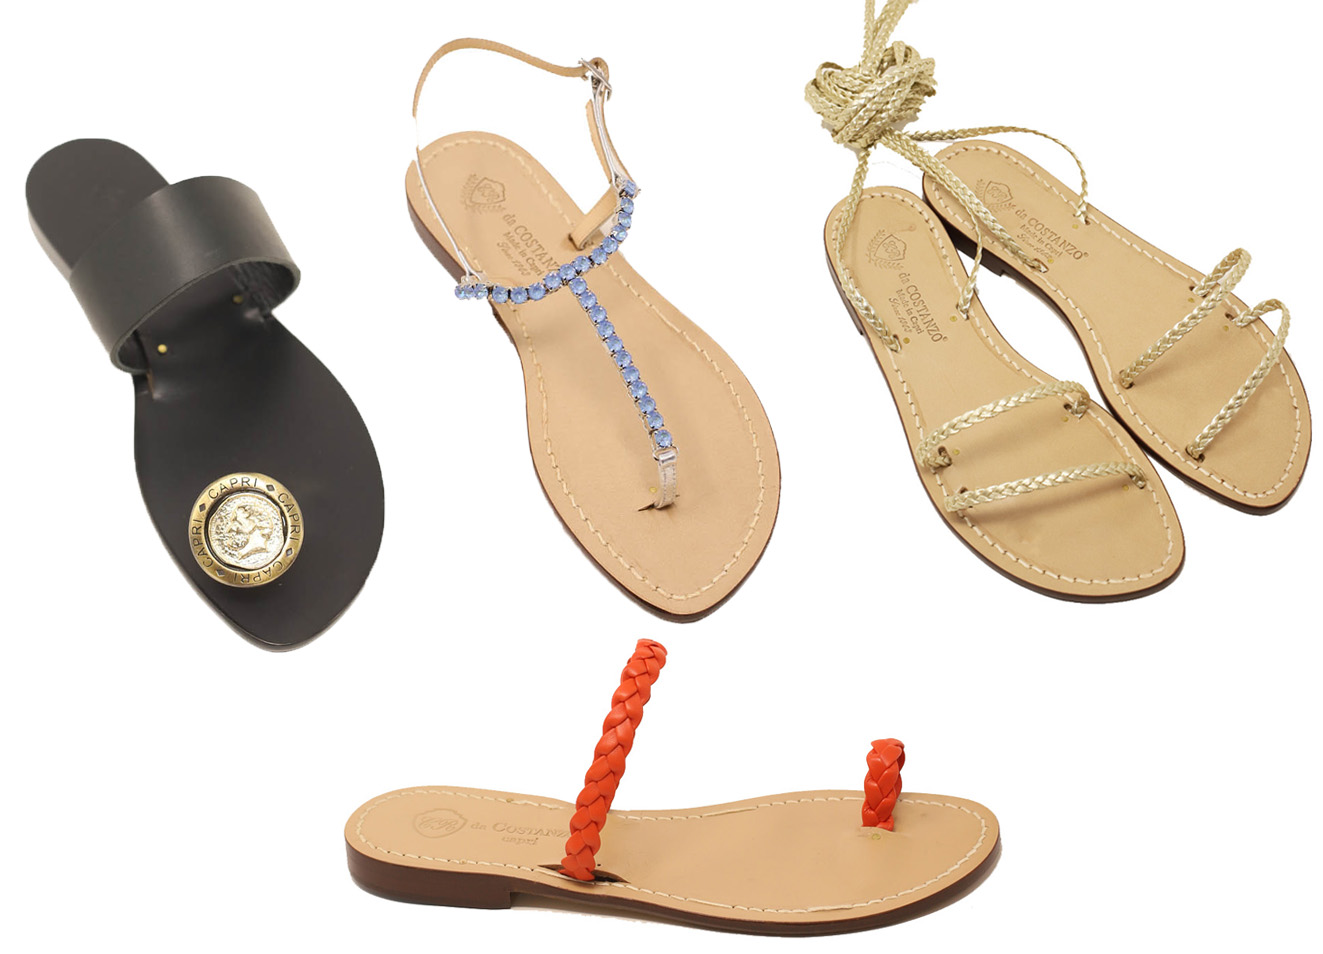 Discovering Summer Elegance: The Capri Sandals That Enchant the World